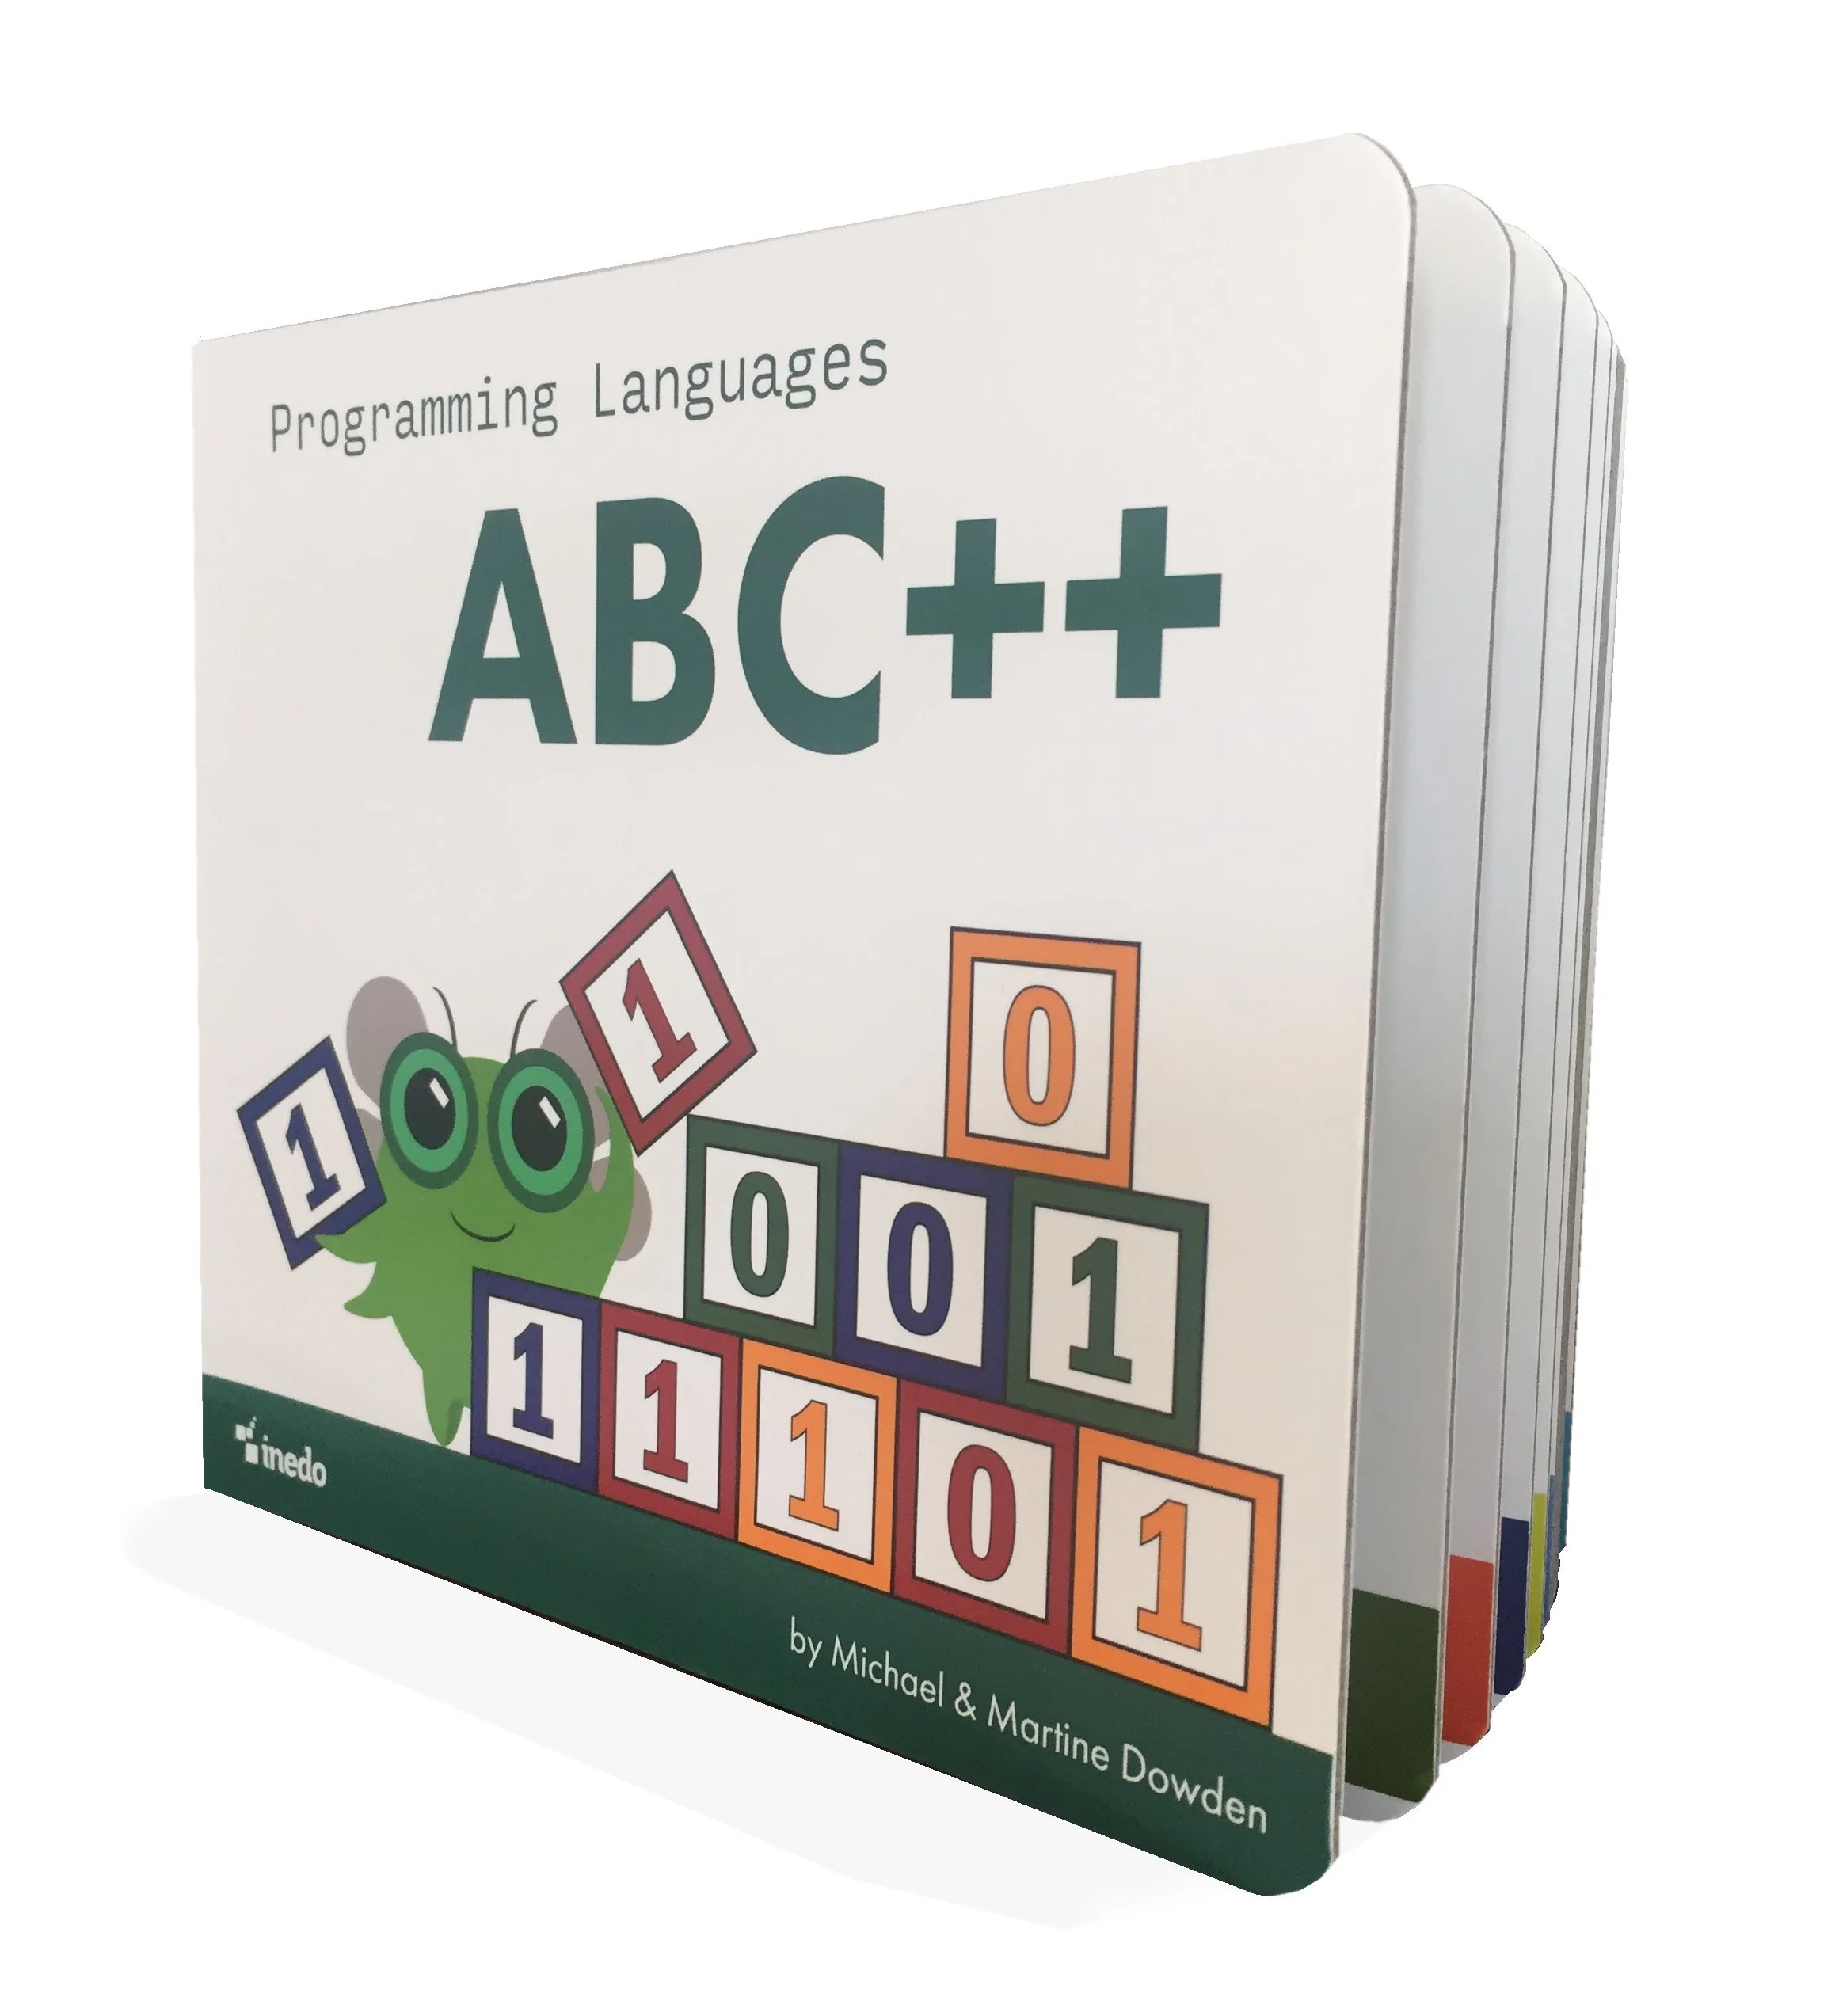 Programming Languages ABC++ Board Book